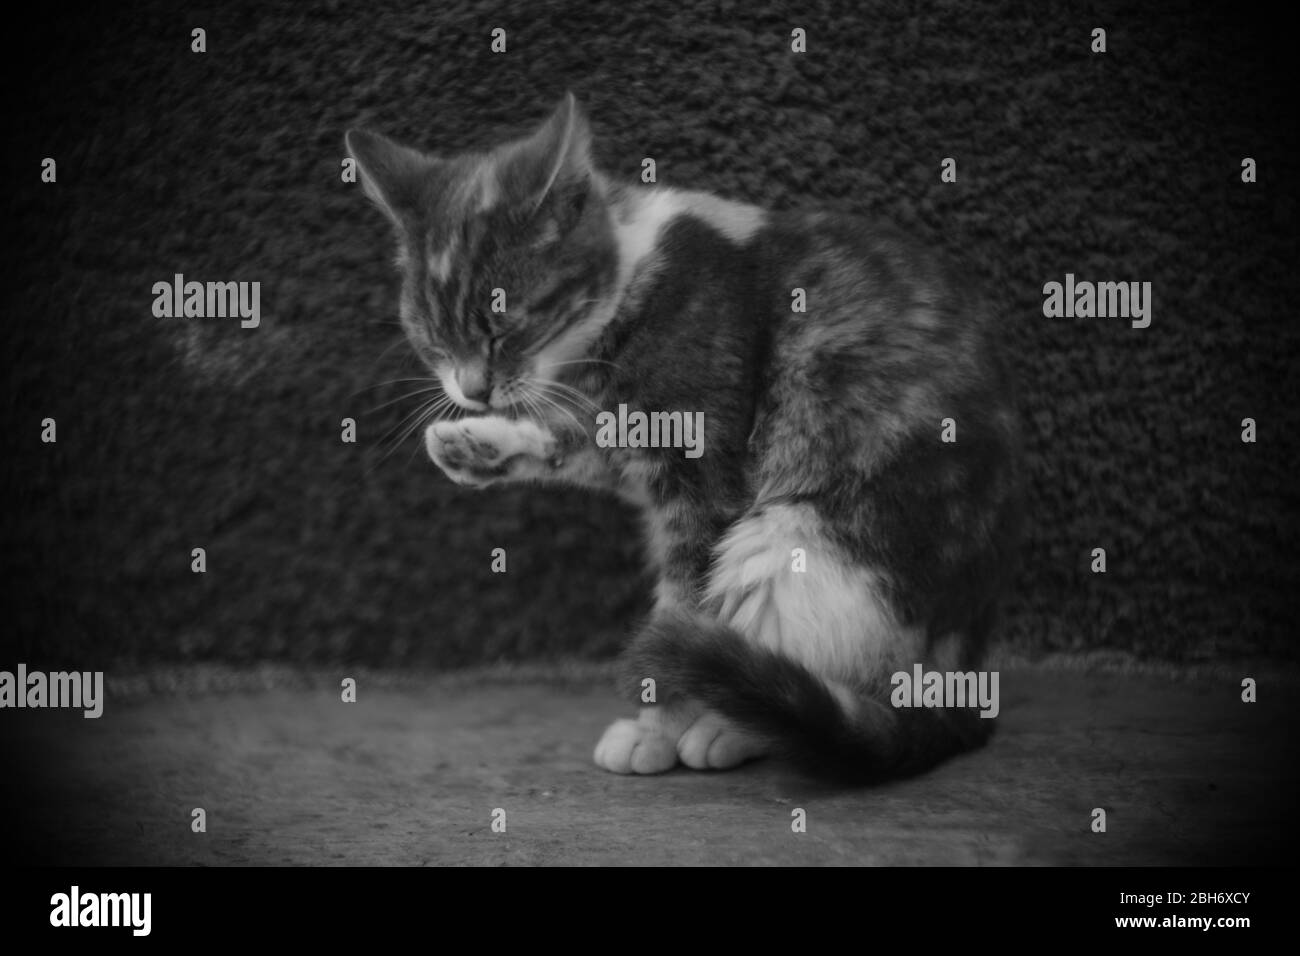 cat washes itself with paws outdoors, cats keep clean, bw photo Stock Photo